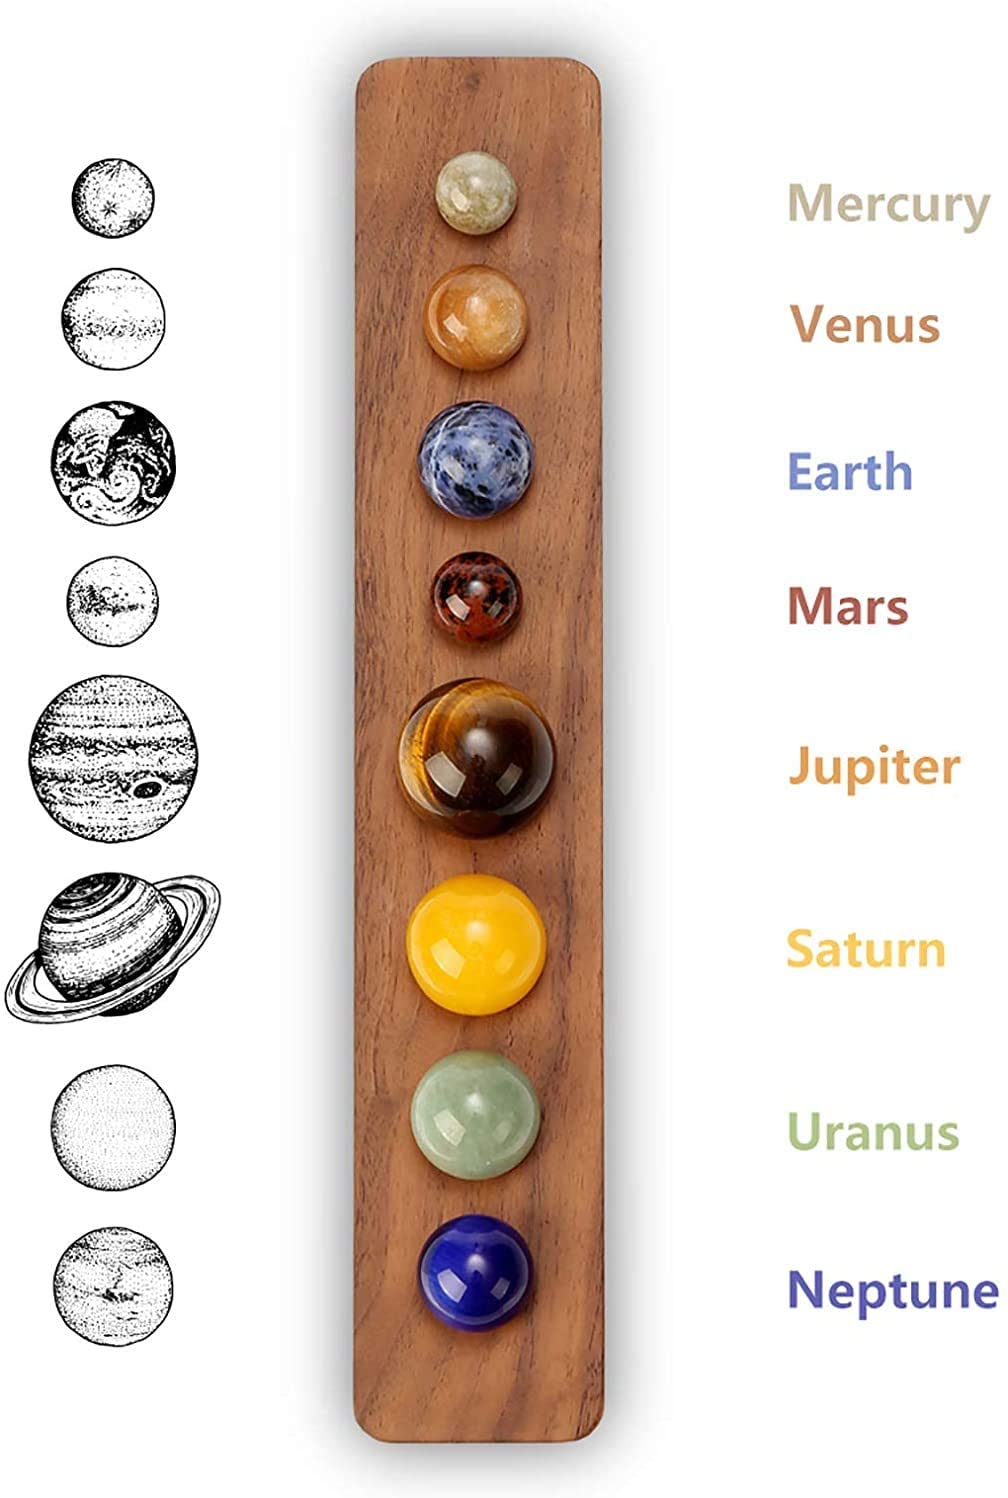 8 round gemstones each one representing the 8 planets in the universe nestled in a walnut case